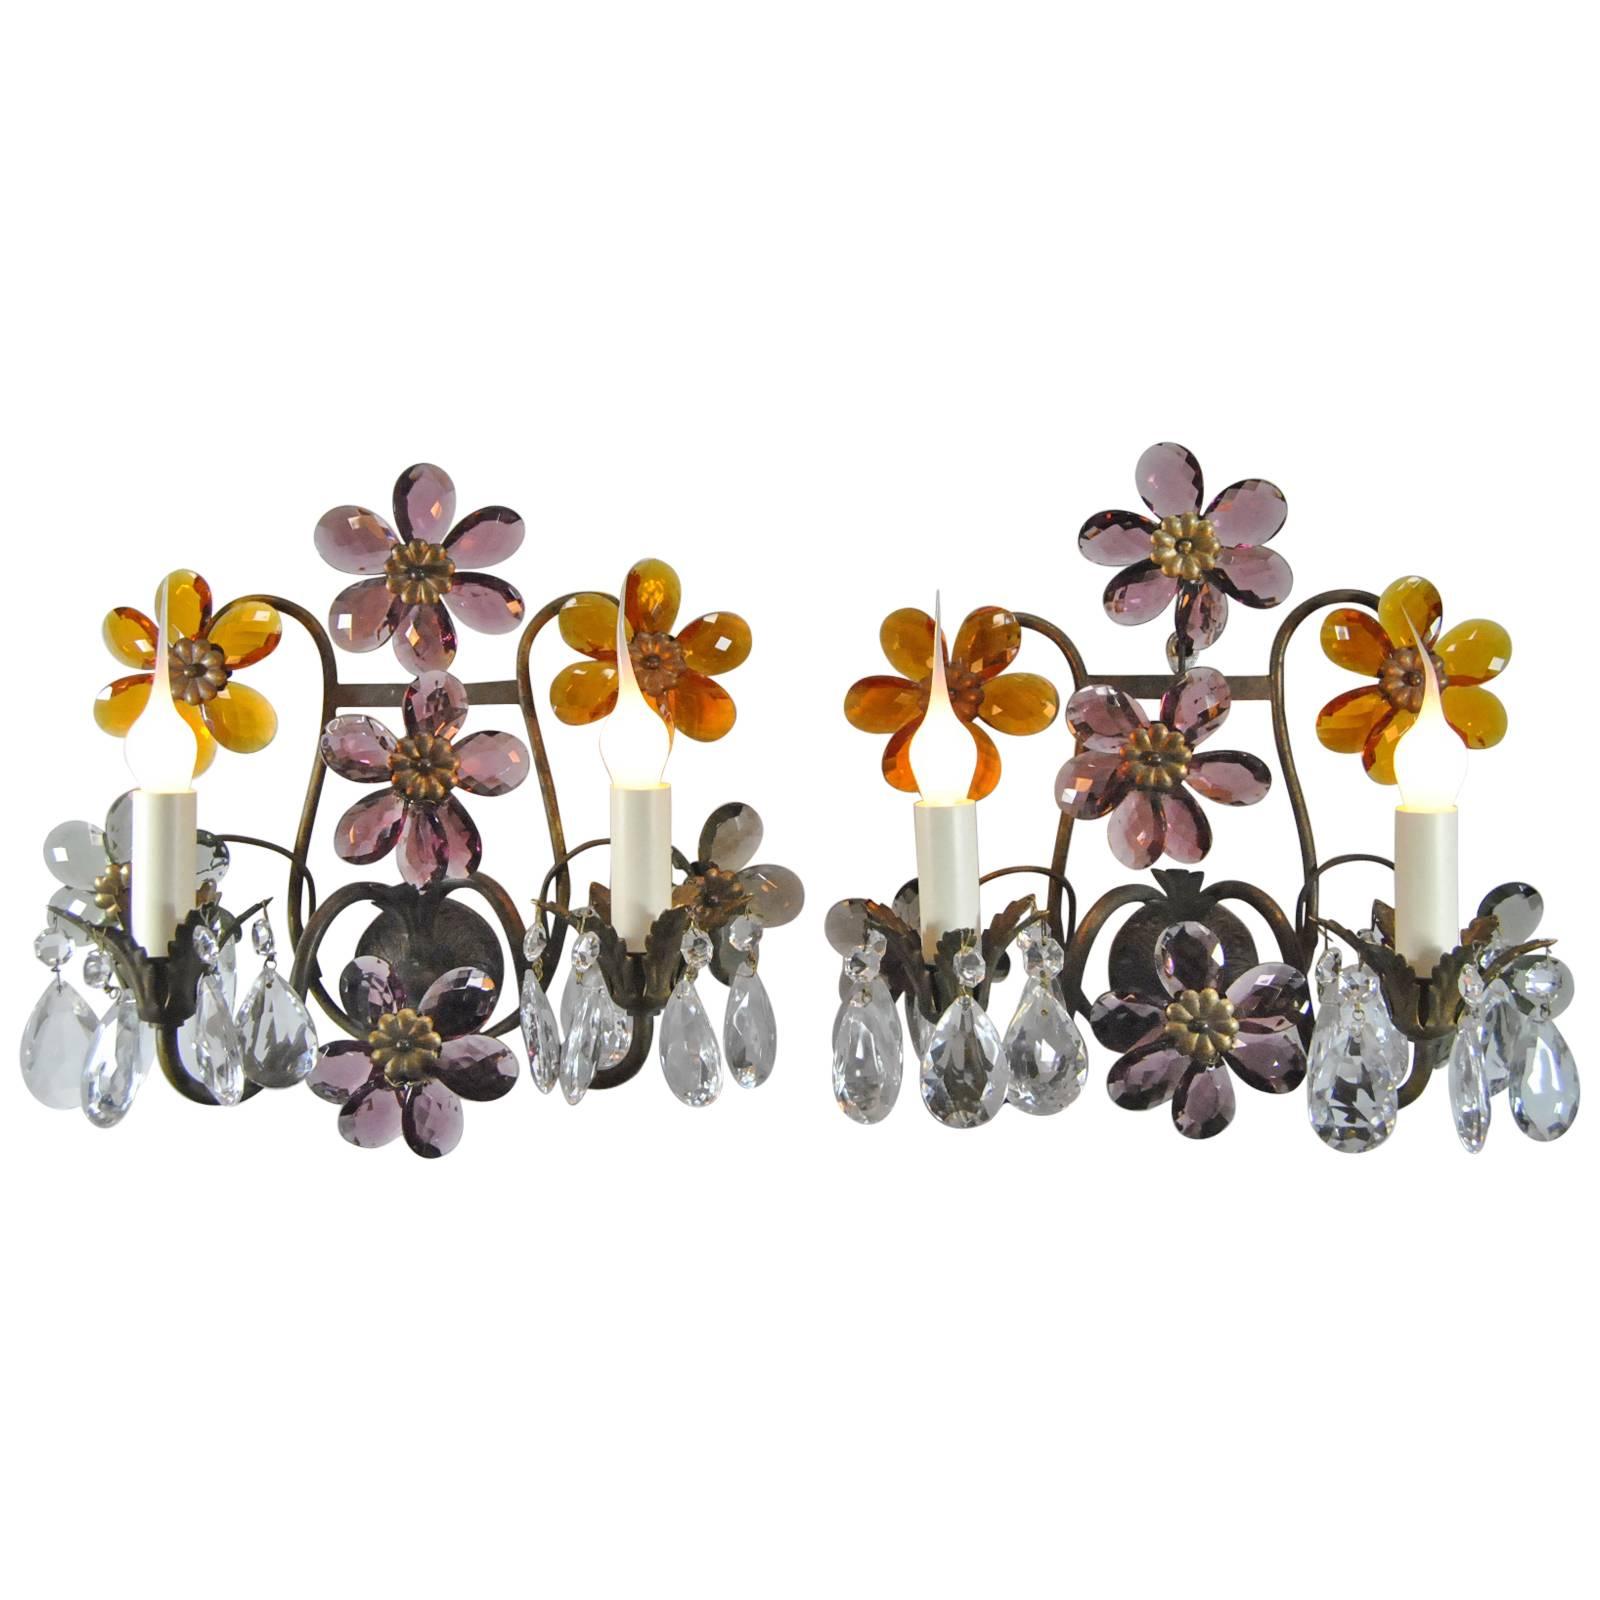 Antique French Bronze Wall Sconces, Pair with Cut Crystal Floral Design Details For Sale